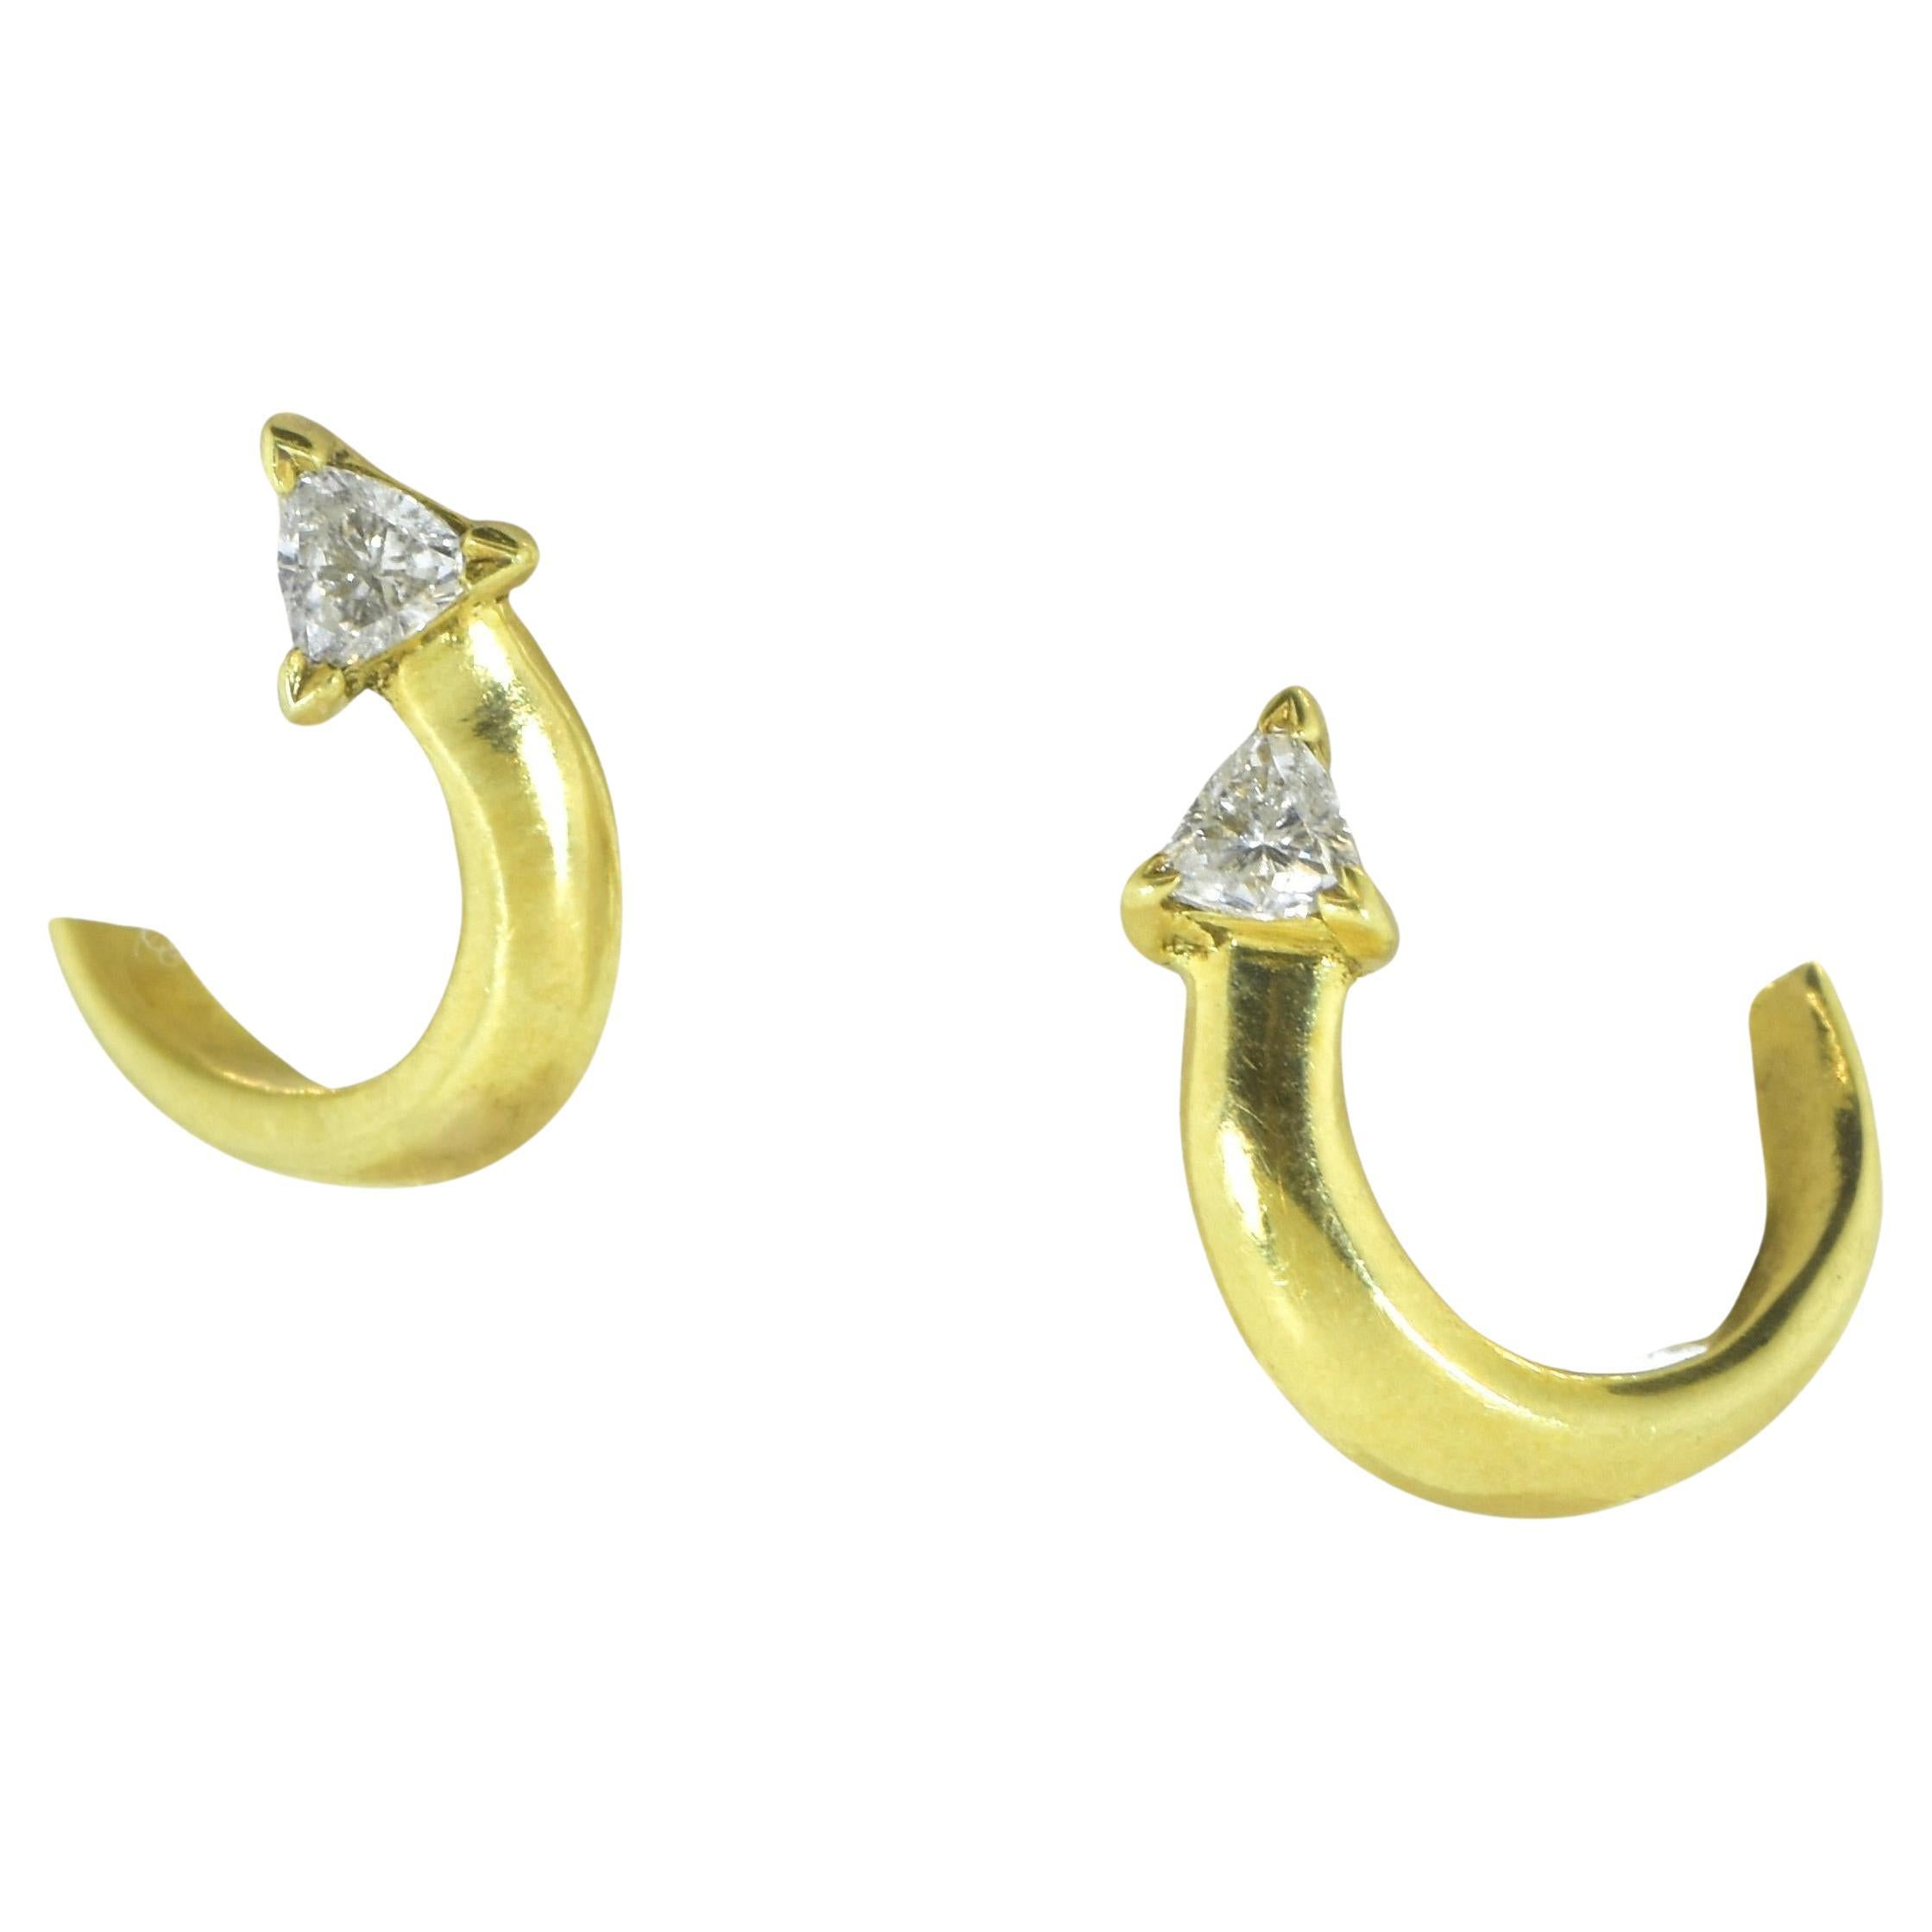 Cartier 18K Yellow Gold and Fine Diamond Vintage Earrings, c. 1970 For Sale